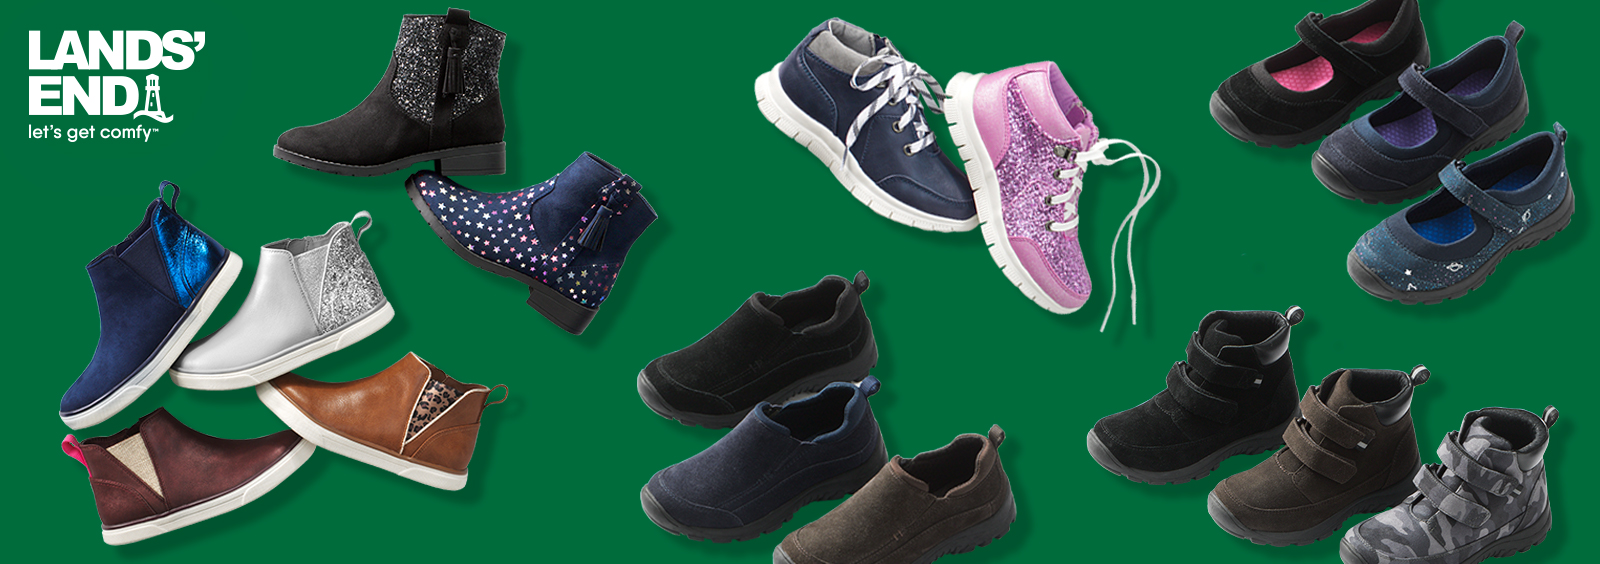 Guide to Kids’ Shoes for Back-to-School